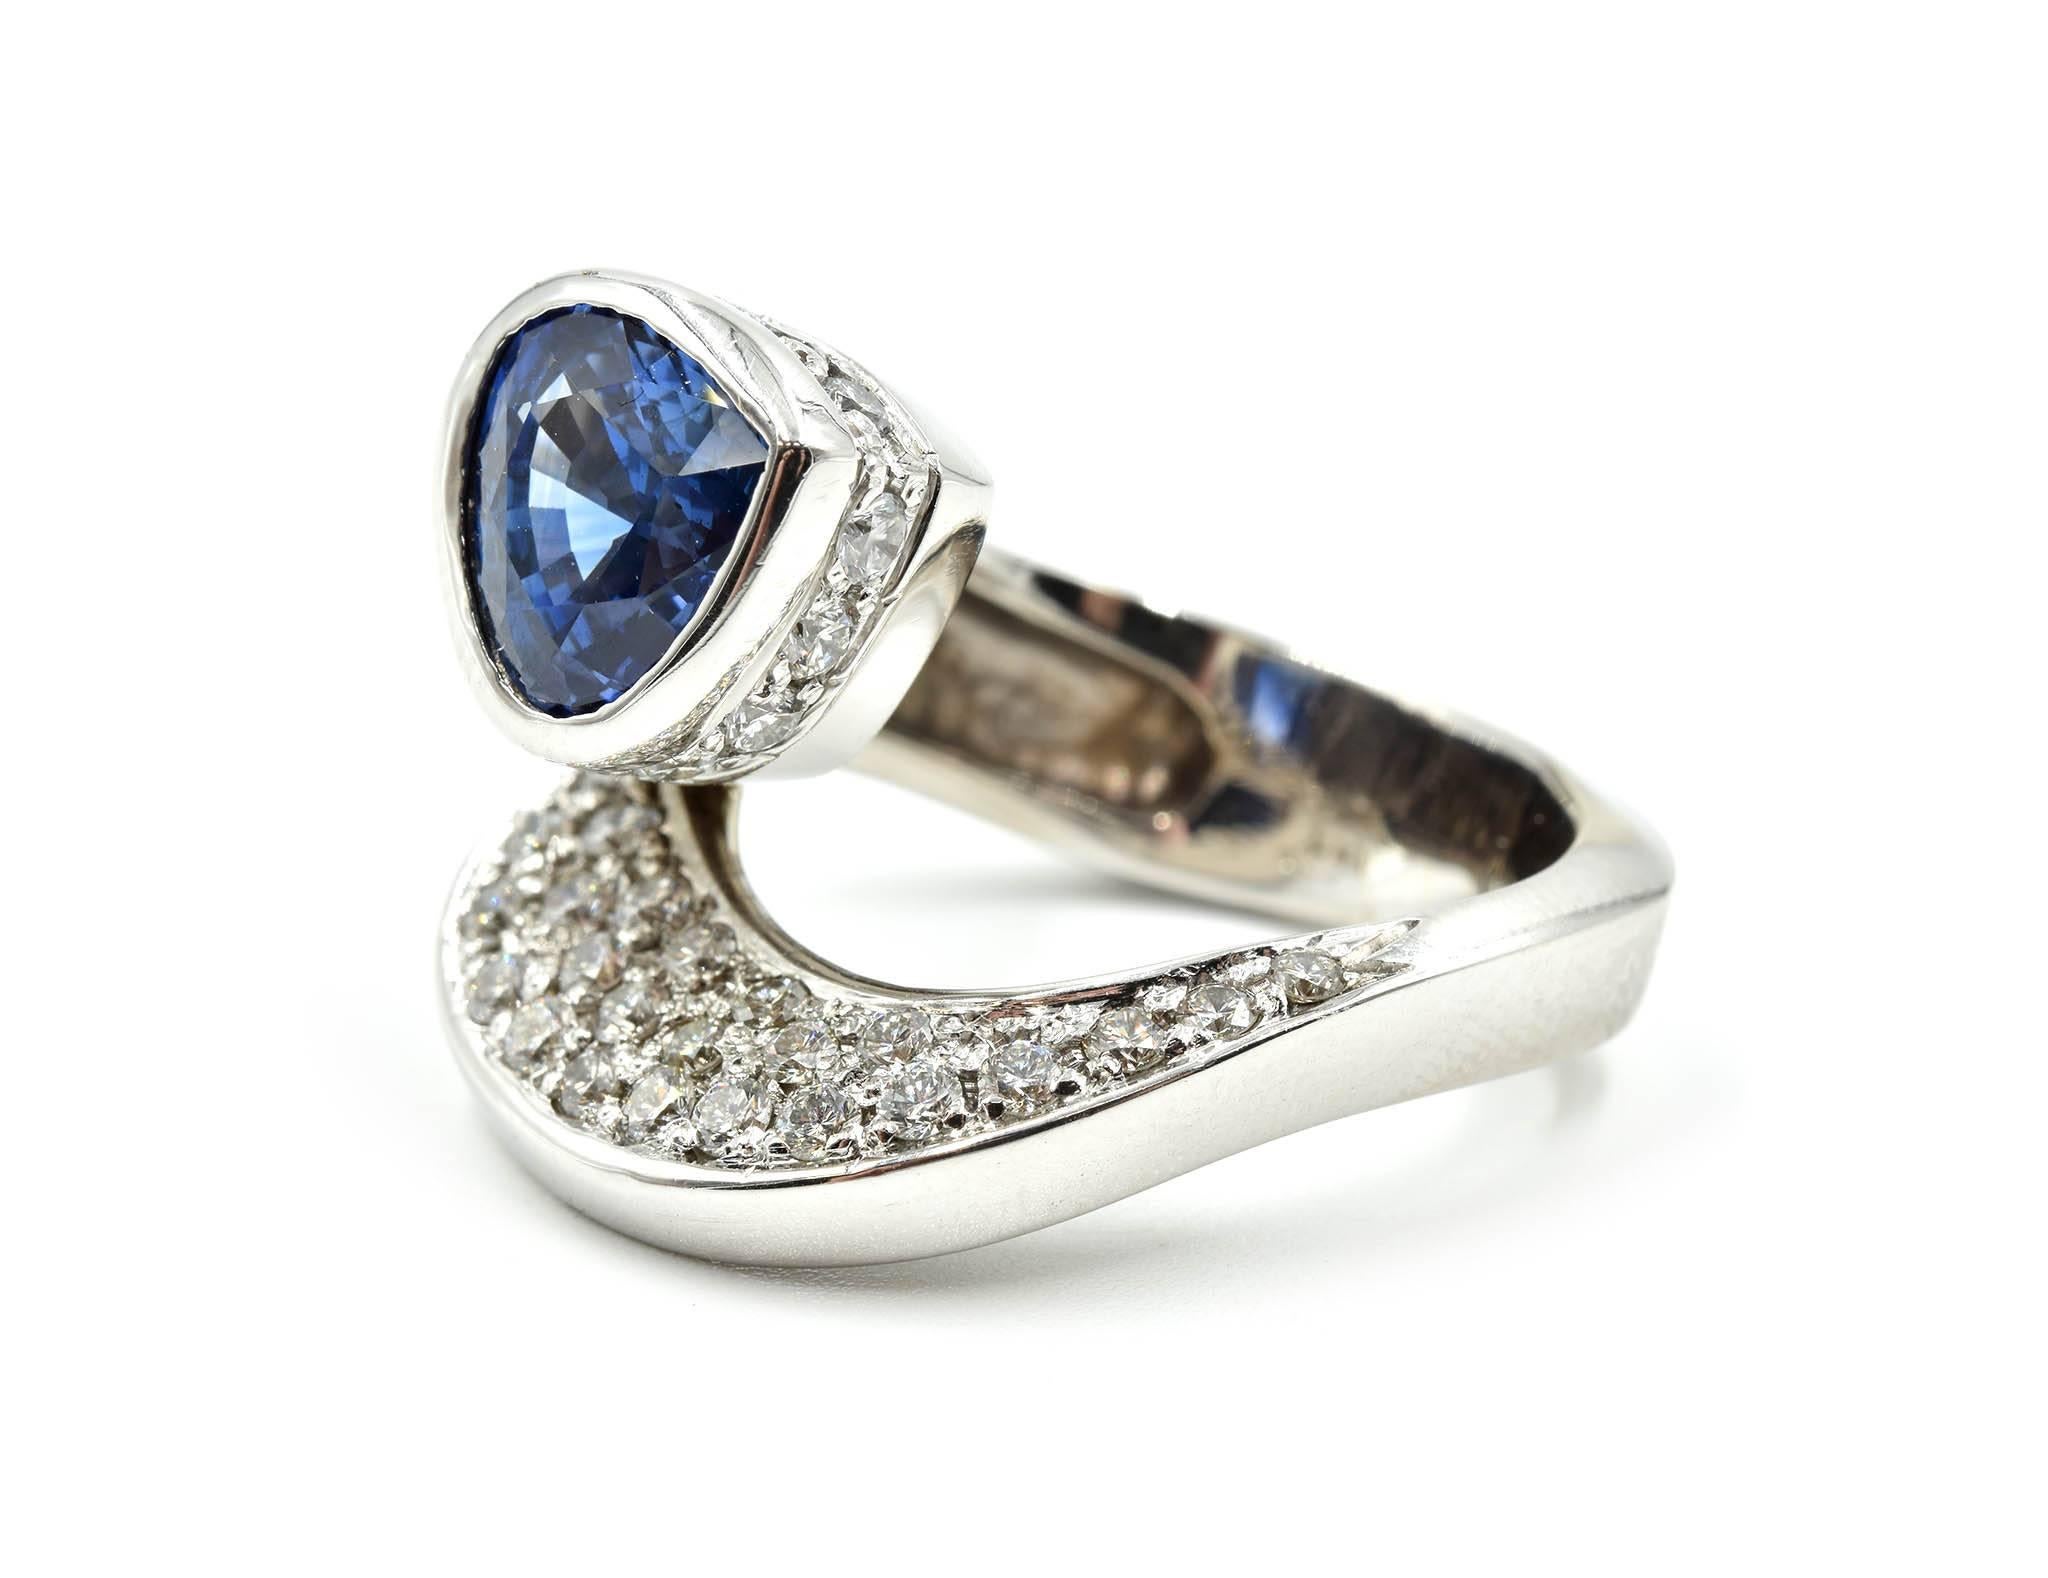 Designer: custom design
Material: 14k white gold
Sapphire: blue trilliant cut sapphire 4.19 carat weight
Diamonds: 1.18 carat total weight
Dimensions: 21.99mm in length and 19.32mm wide
Ring Size: 7 ½ 
Weight: 20.80 grams
